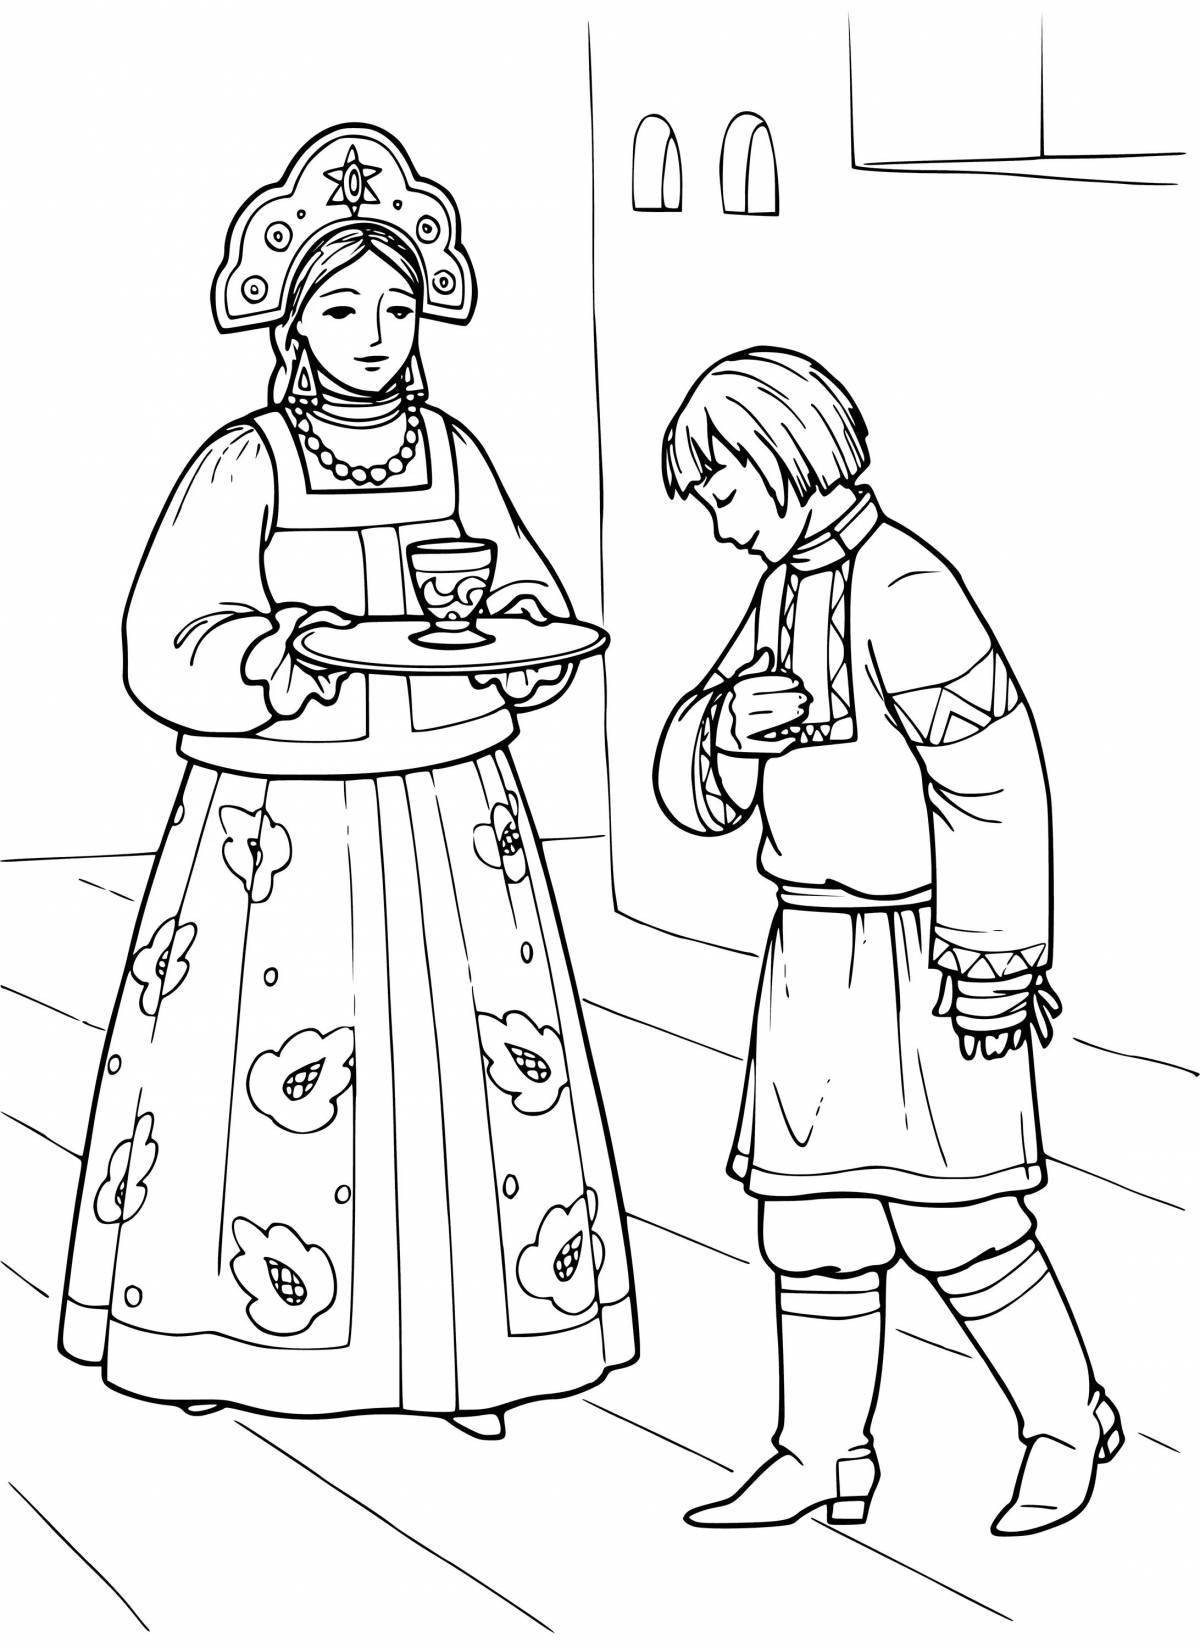 Coloring book shiny Russian costume